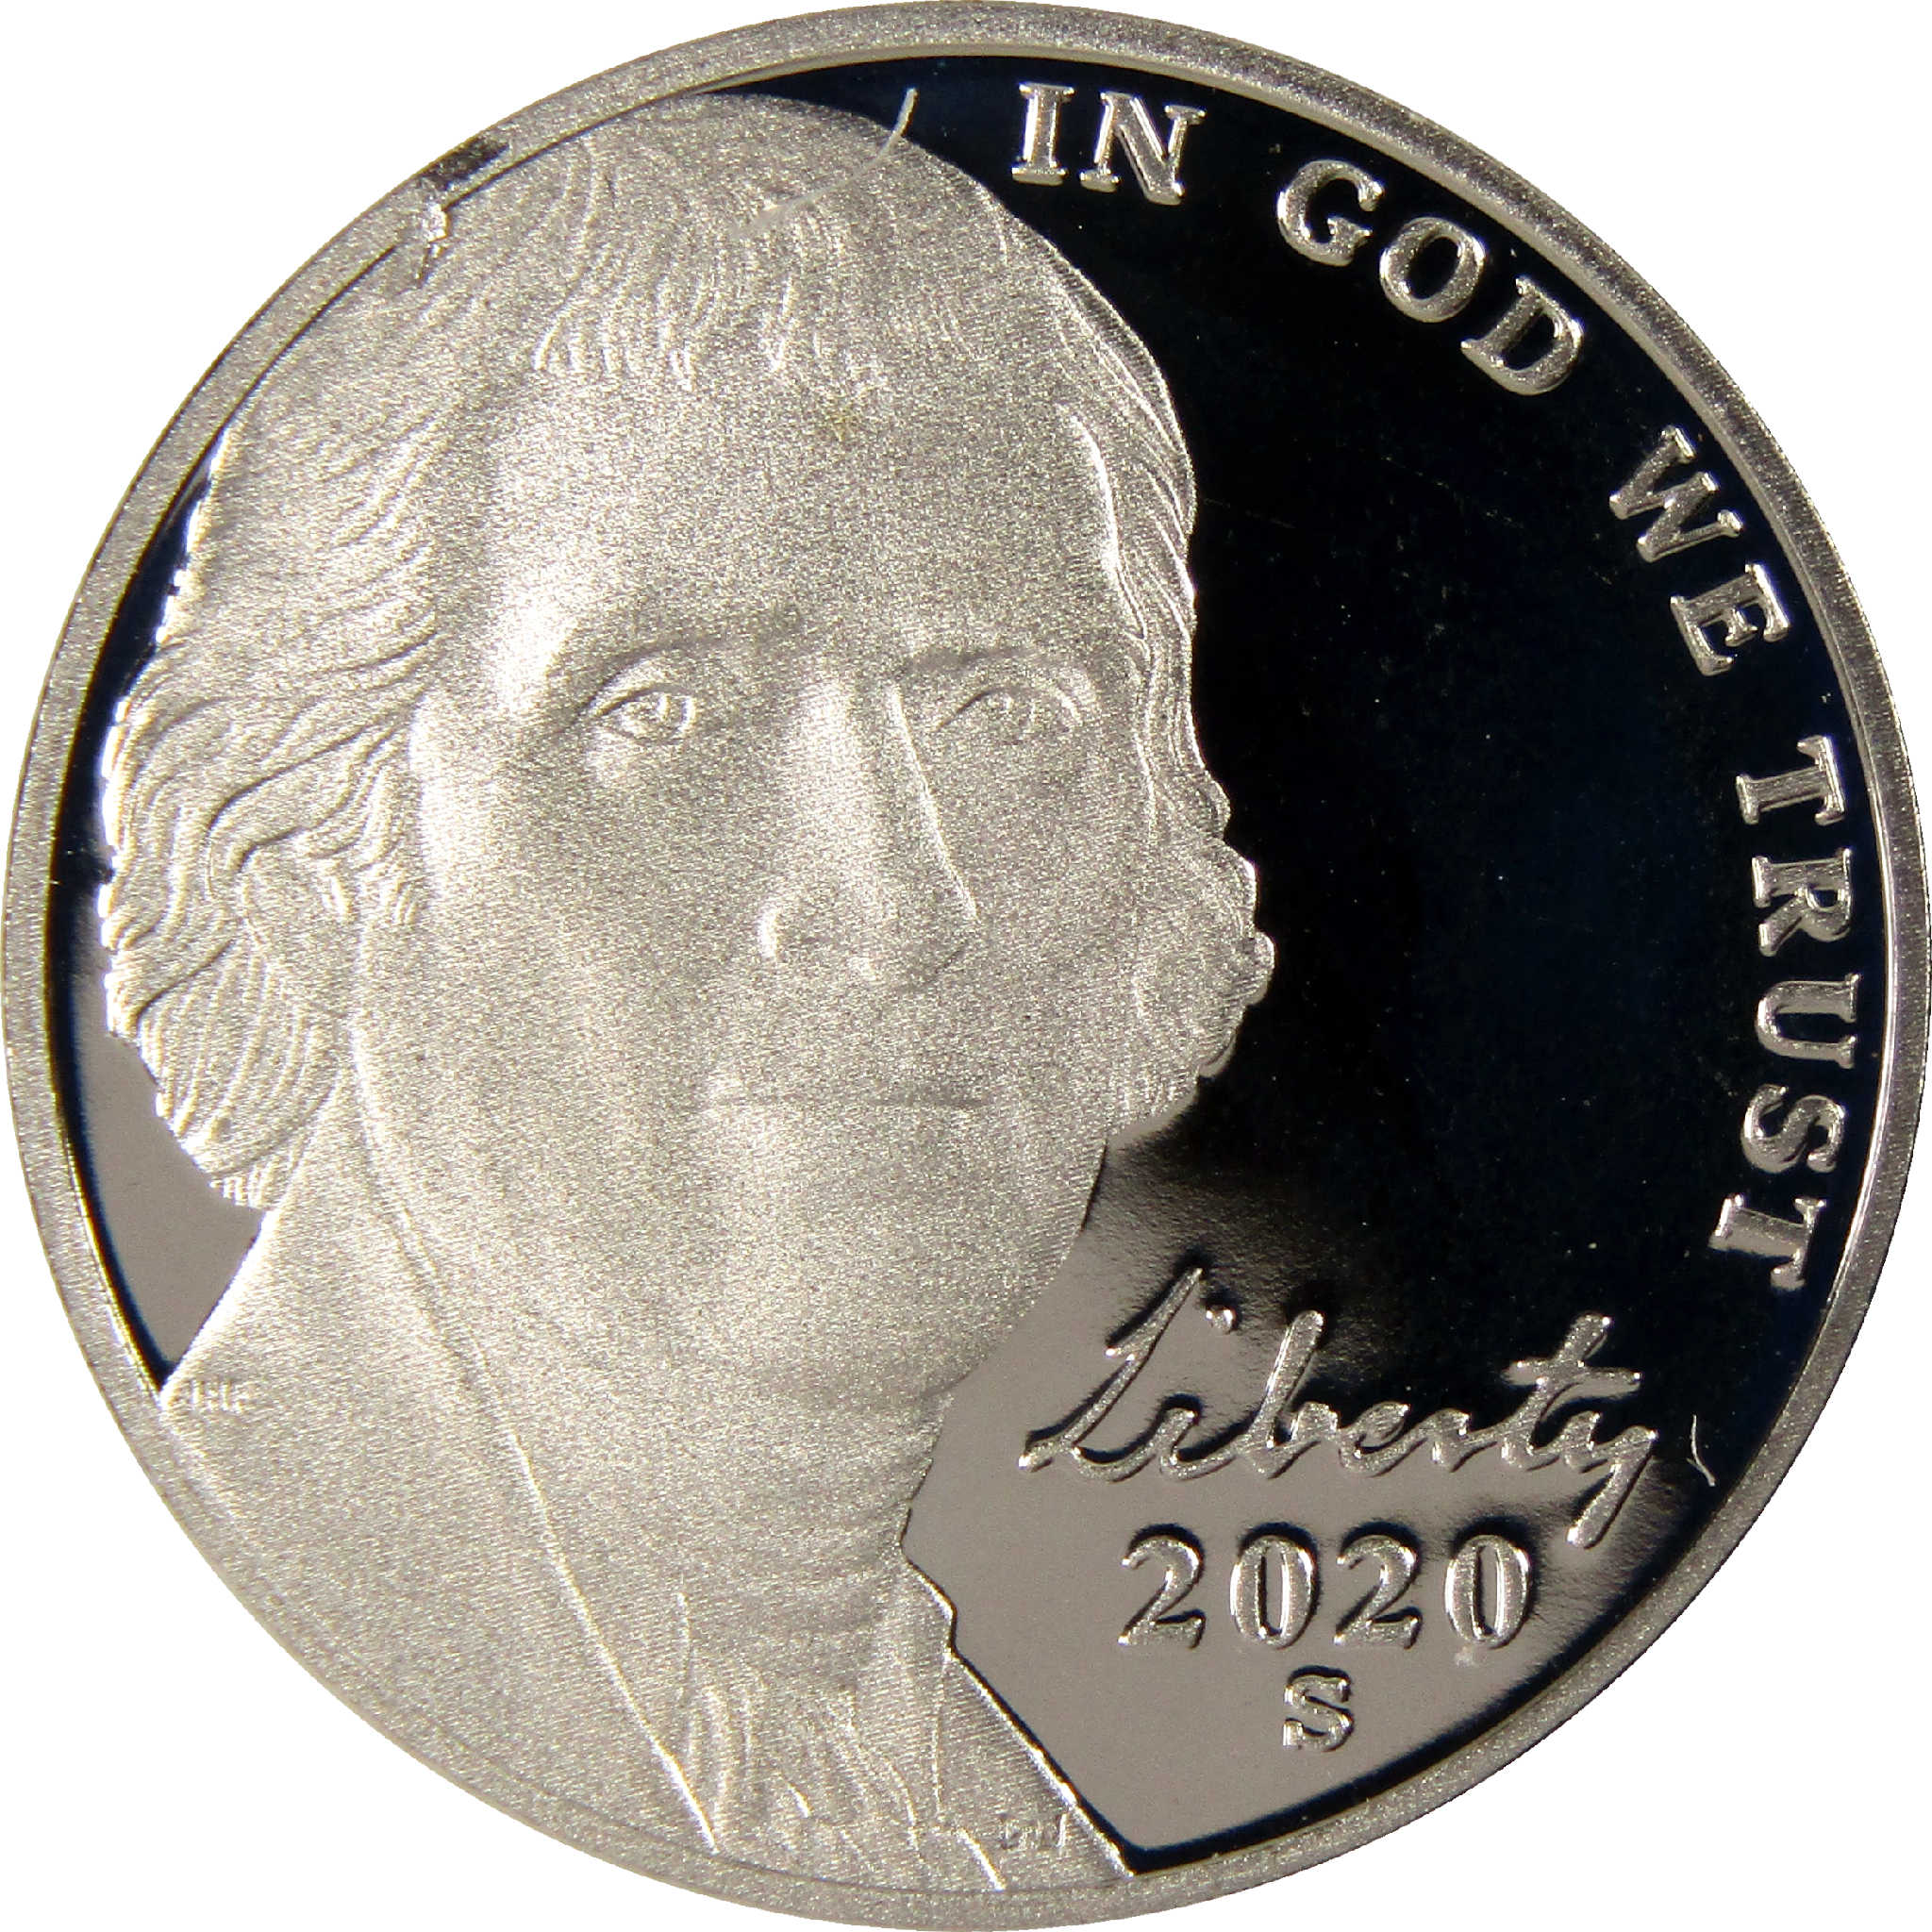 2020 S Jefferson Nickel Choice Proof 5c Coin